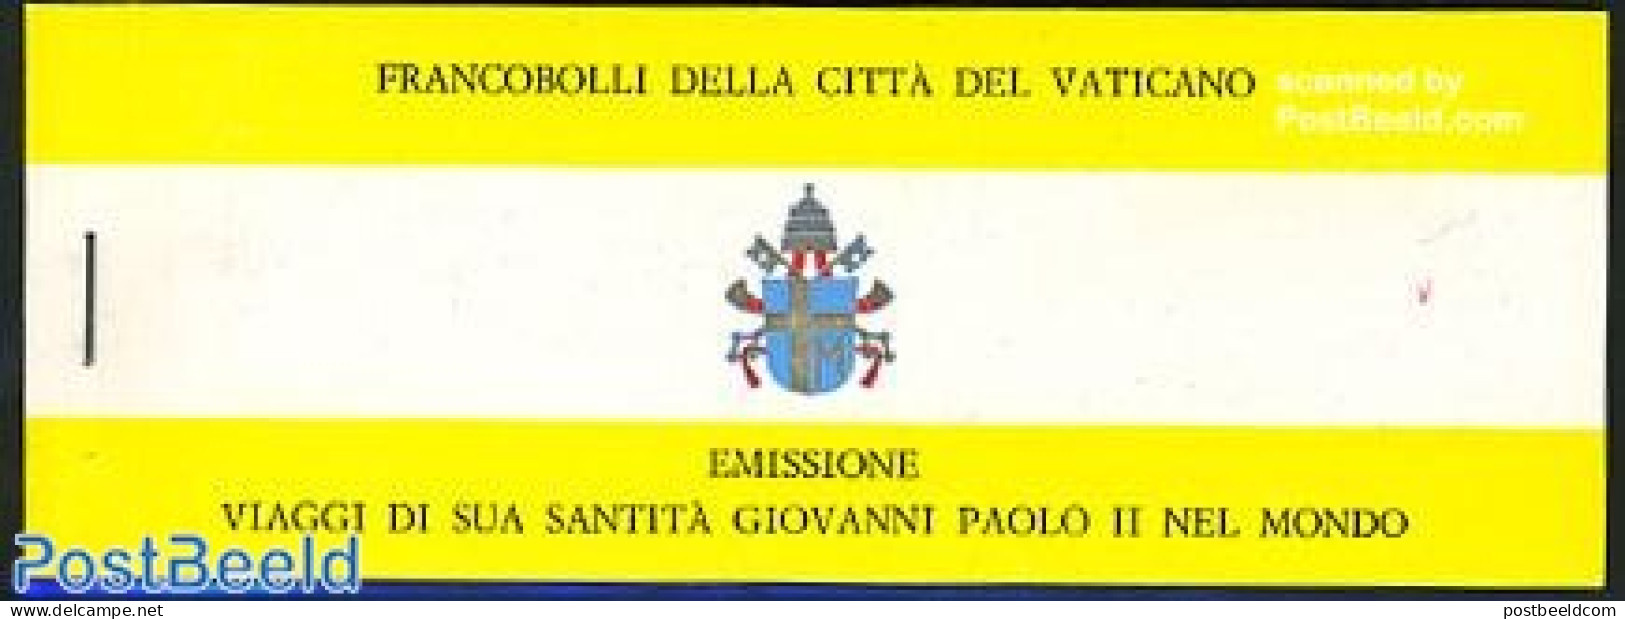 Vatican 1981 Pope Travels Booklet, Mint NH, Stamp Booklets - Unused Stamps